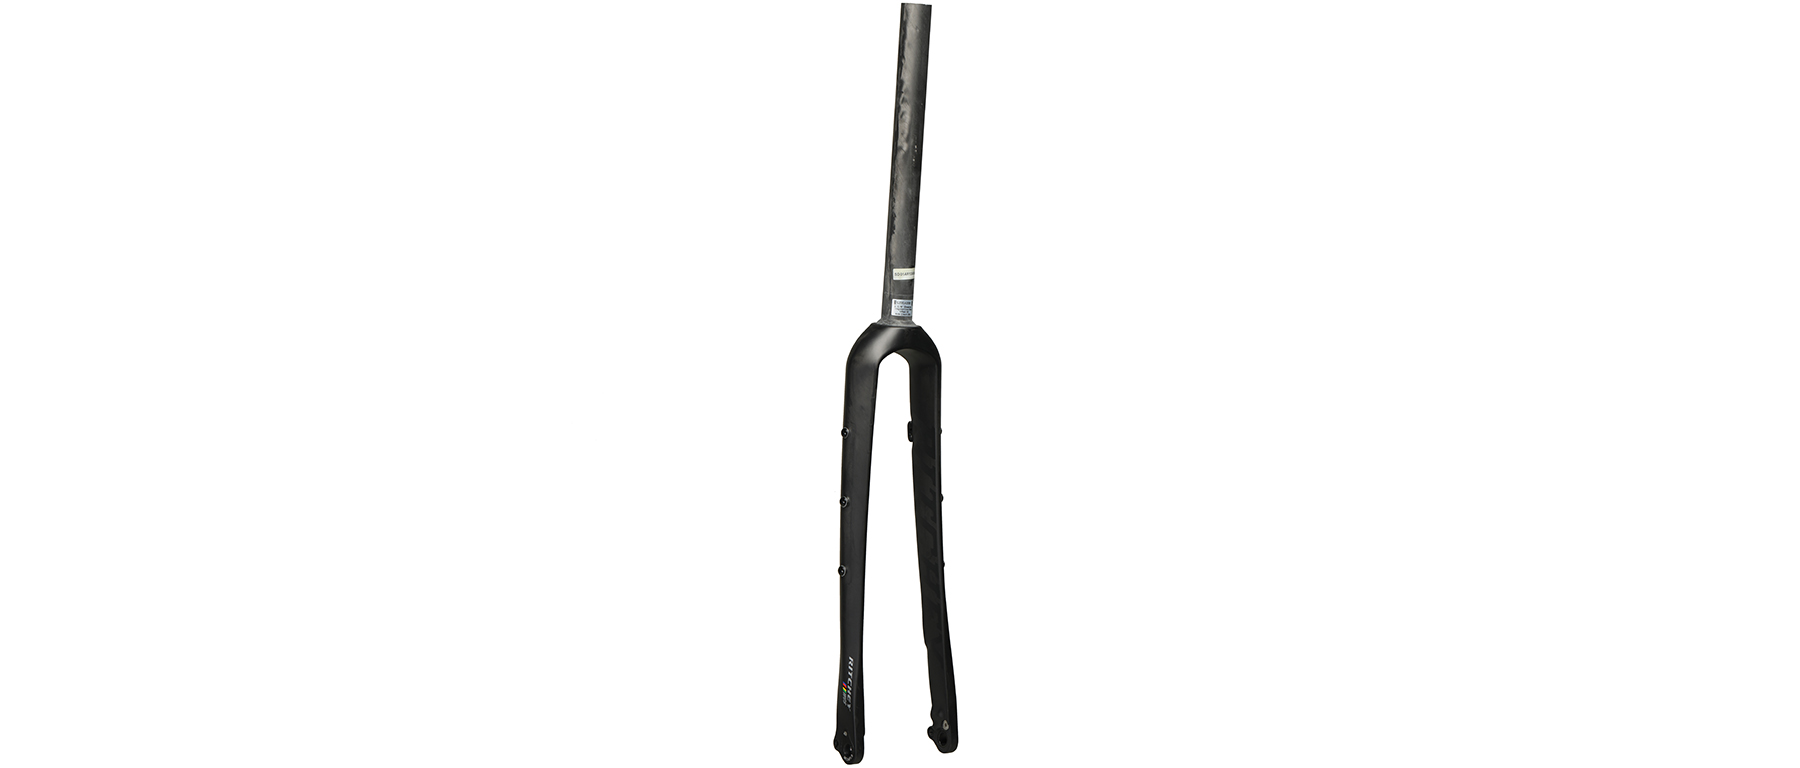 Ritchey WCS Carbon Adventure Disc Fork